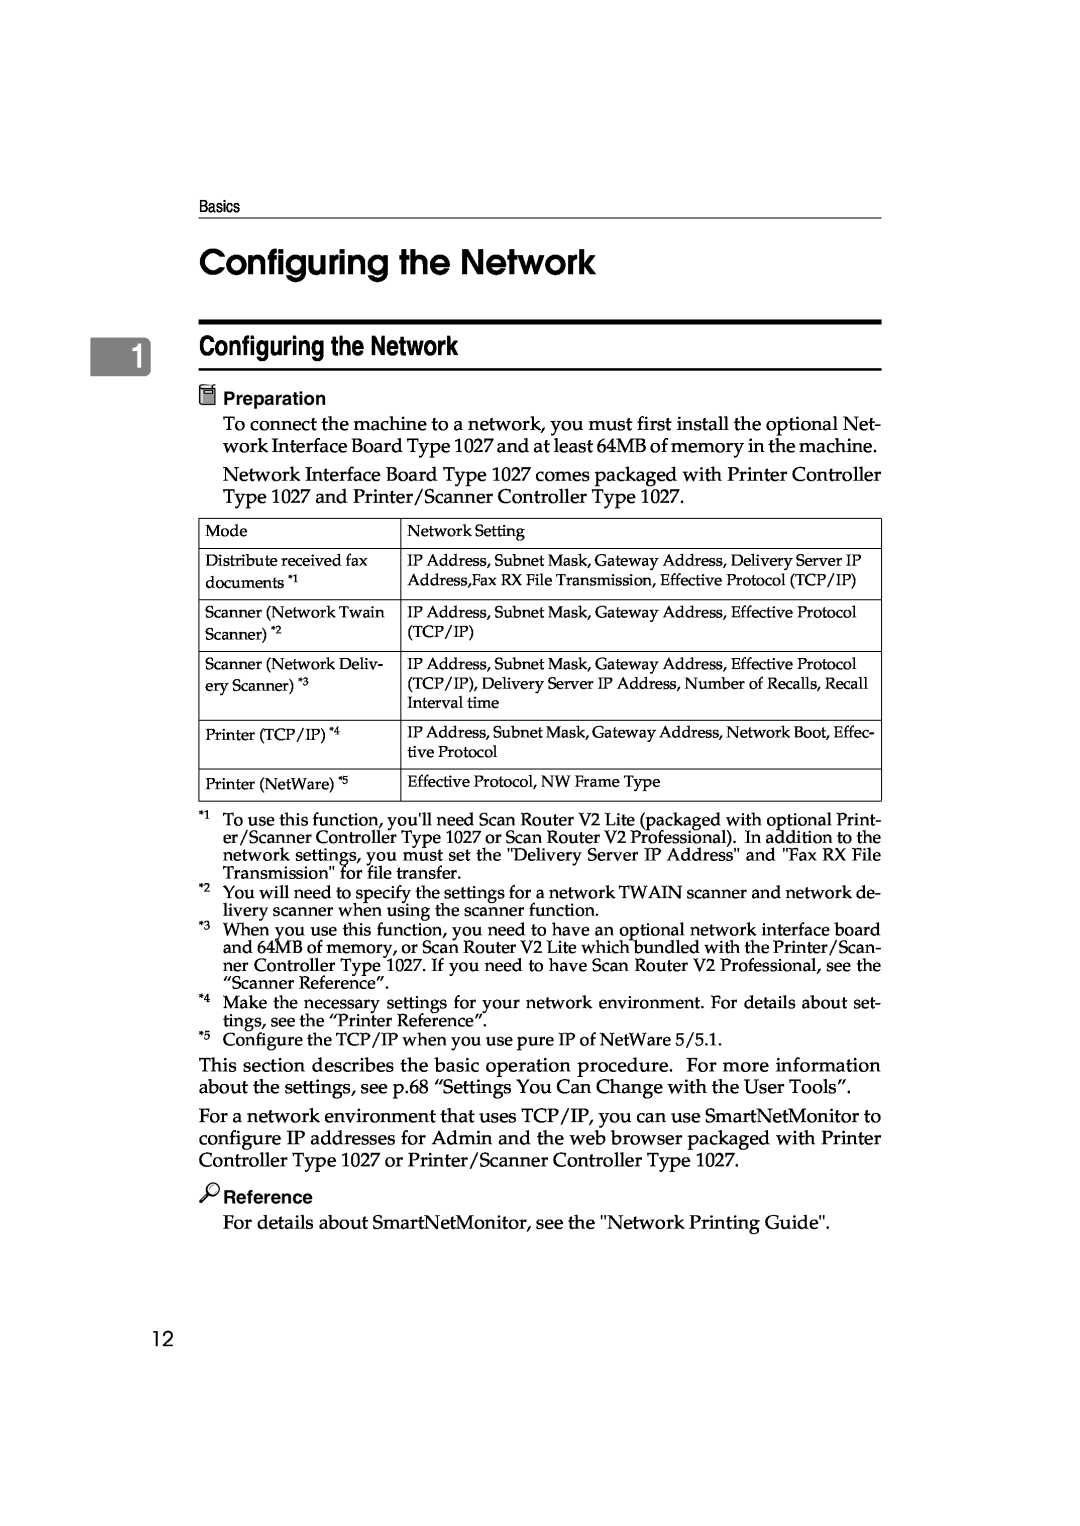 Lanier 5627 AG, 5622 AG manual Configuring the Network, Preparation, Reference 